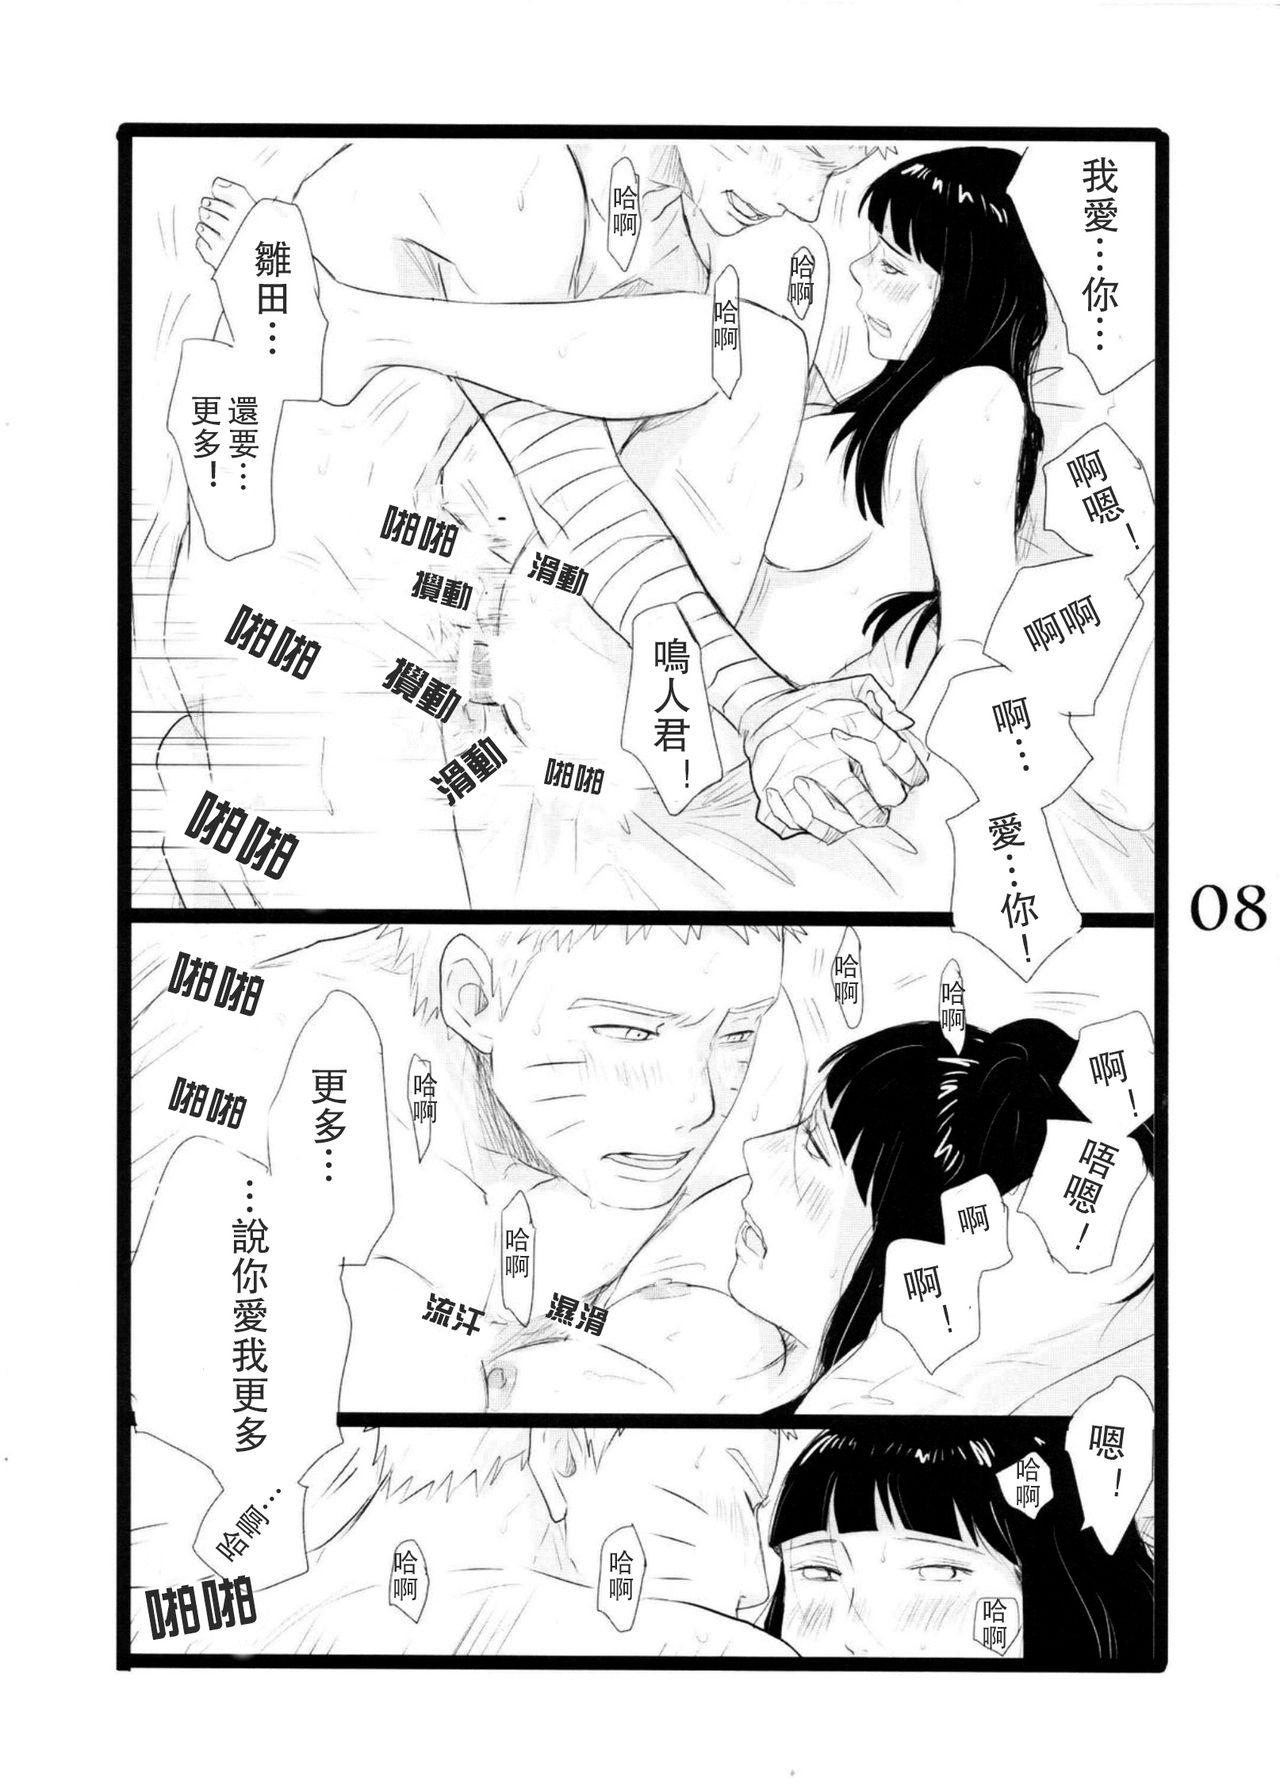 (C88) [blink (shimoyake)] YOUR MY SWEET - I LOVE YOU DARLING (Naruto) [Chinese] [沒有漢化] page 9 full